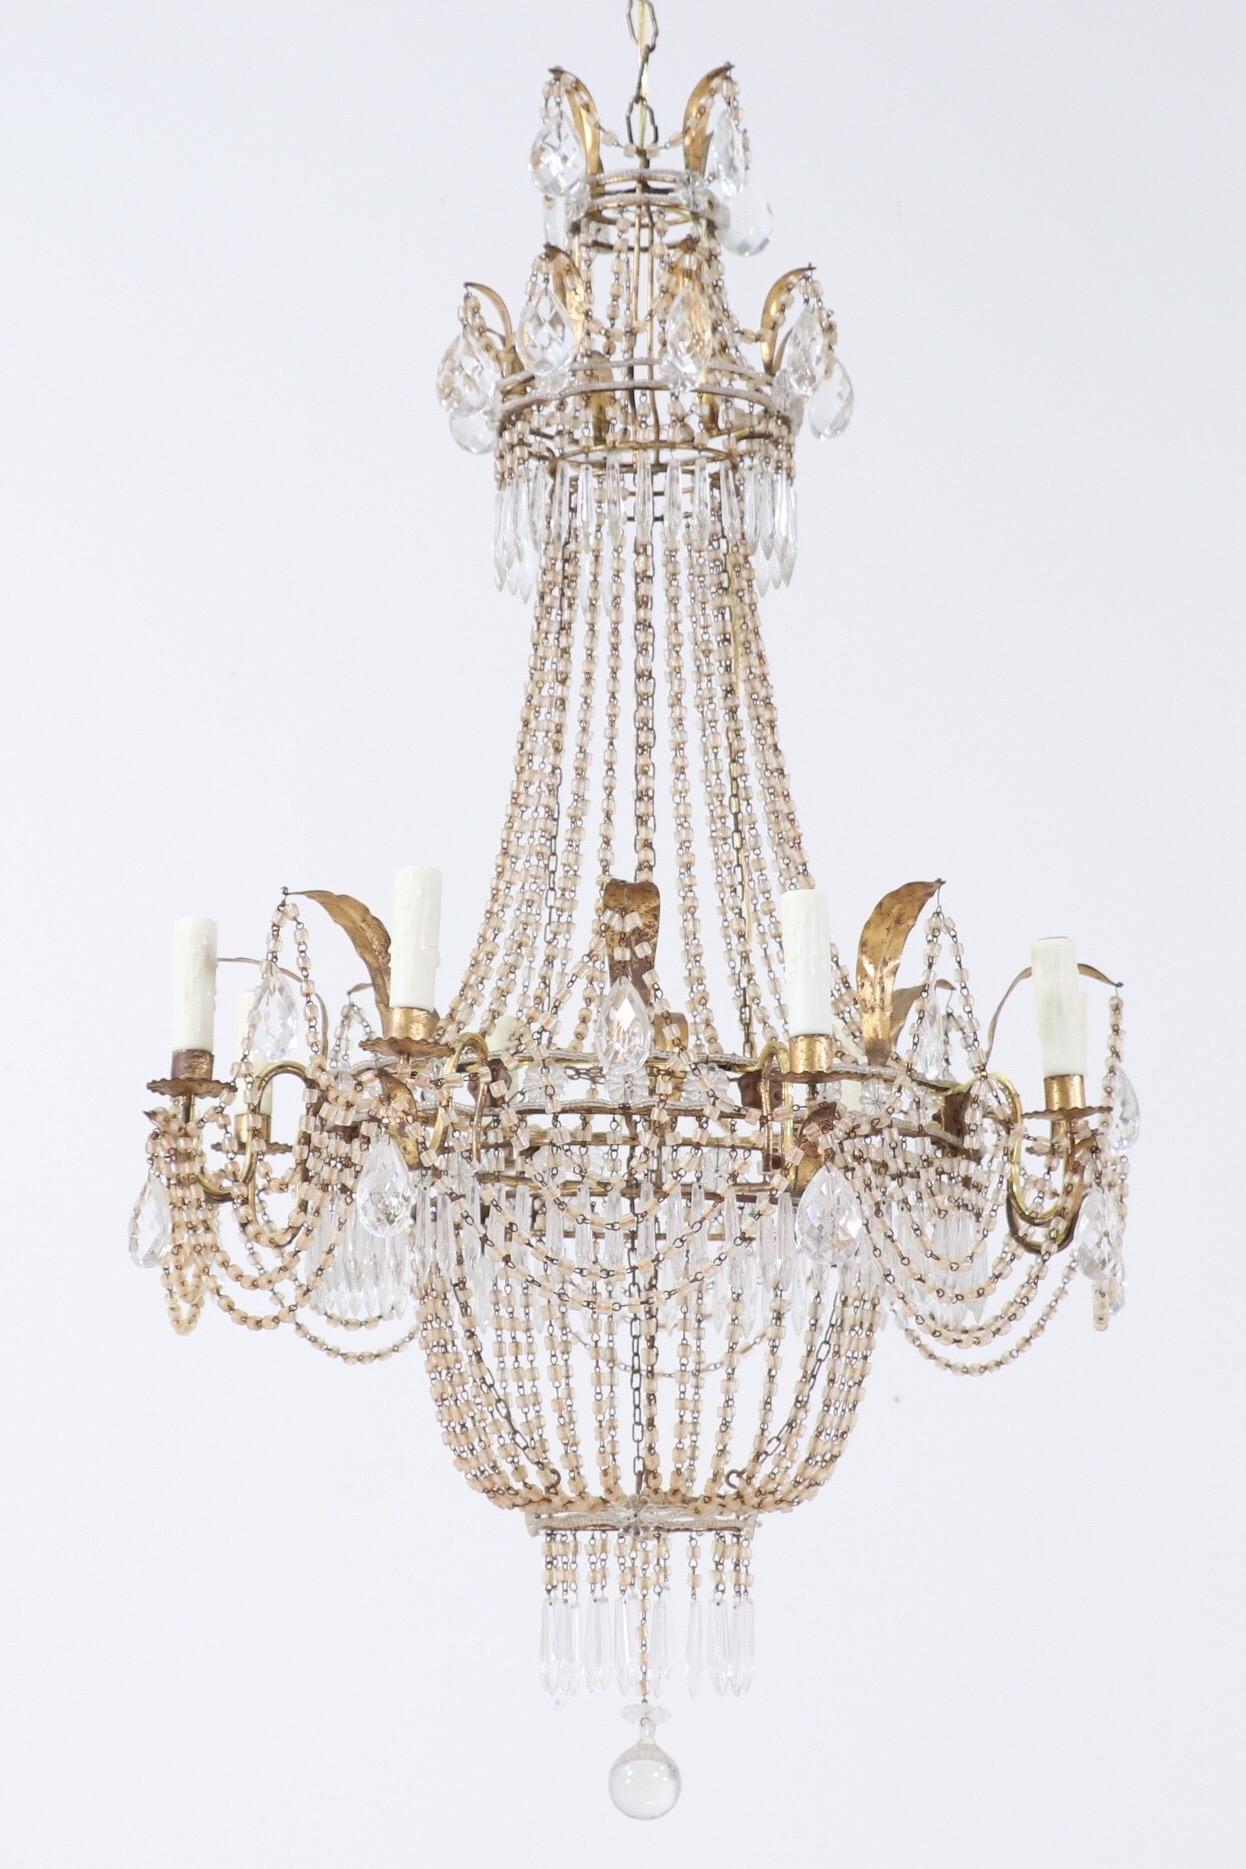 Gorgeous, 1940s Italian crystal beaded chandelier in the Empire style.

The chandelier consists of a leafy gilt iron frame decorated with macaroni glass bead drapes. The beads have acquired a pleasing rusty patina over the decades adding to its